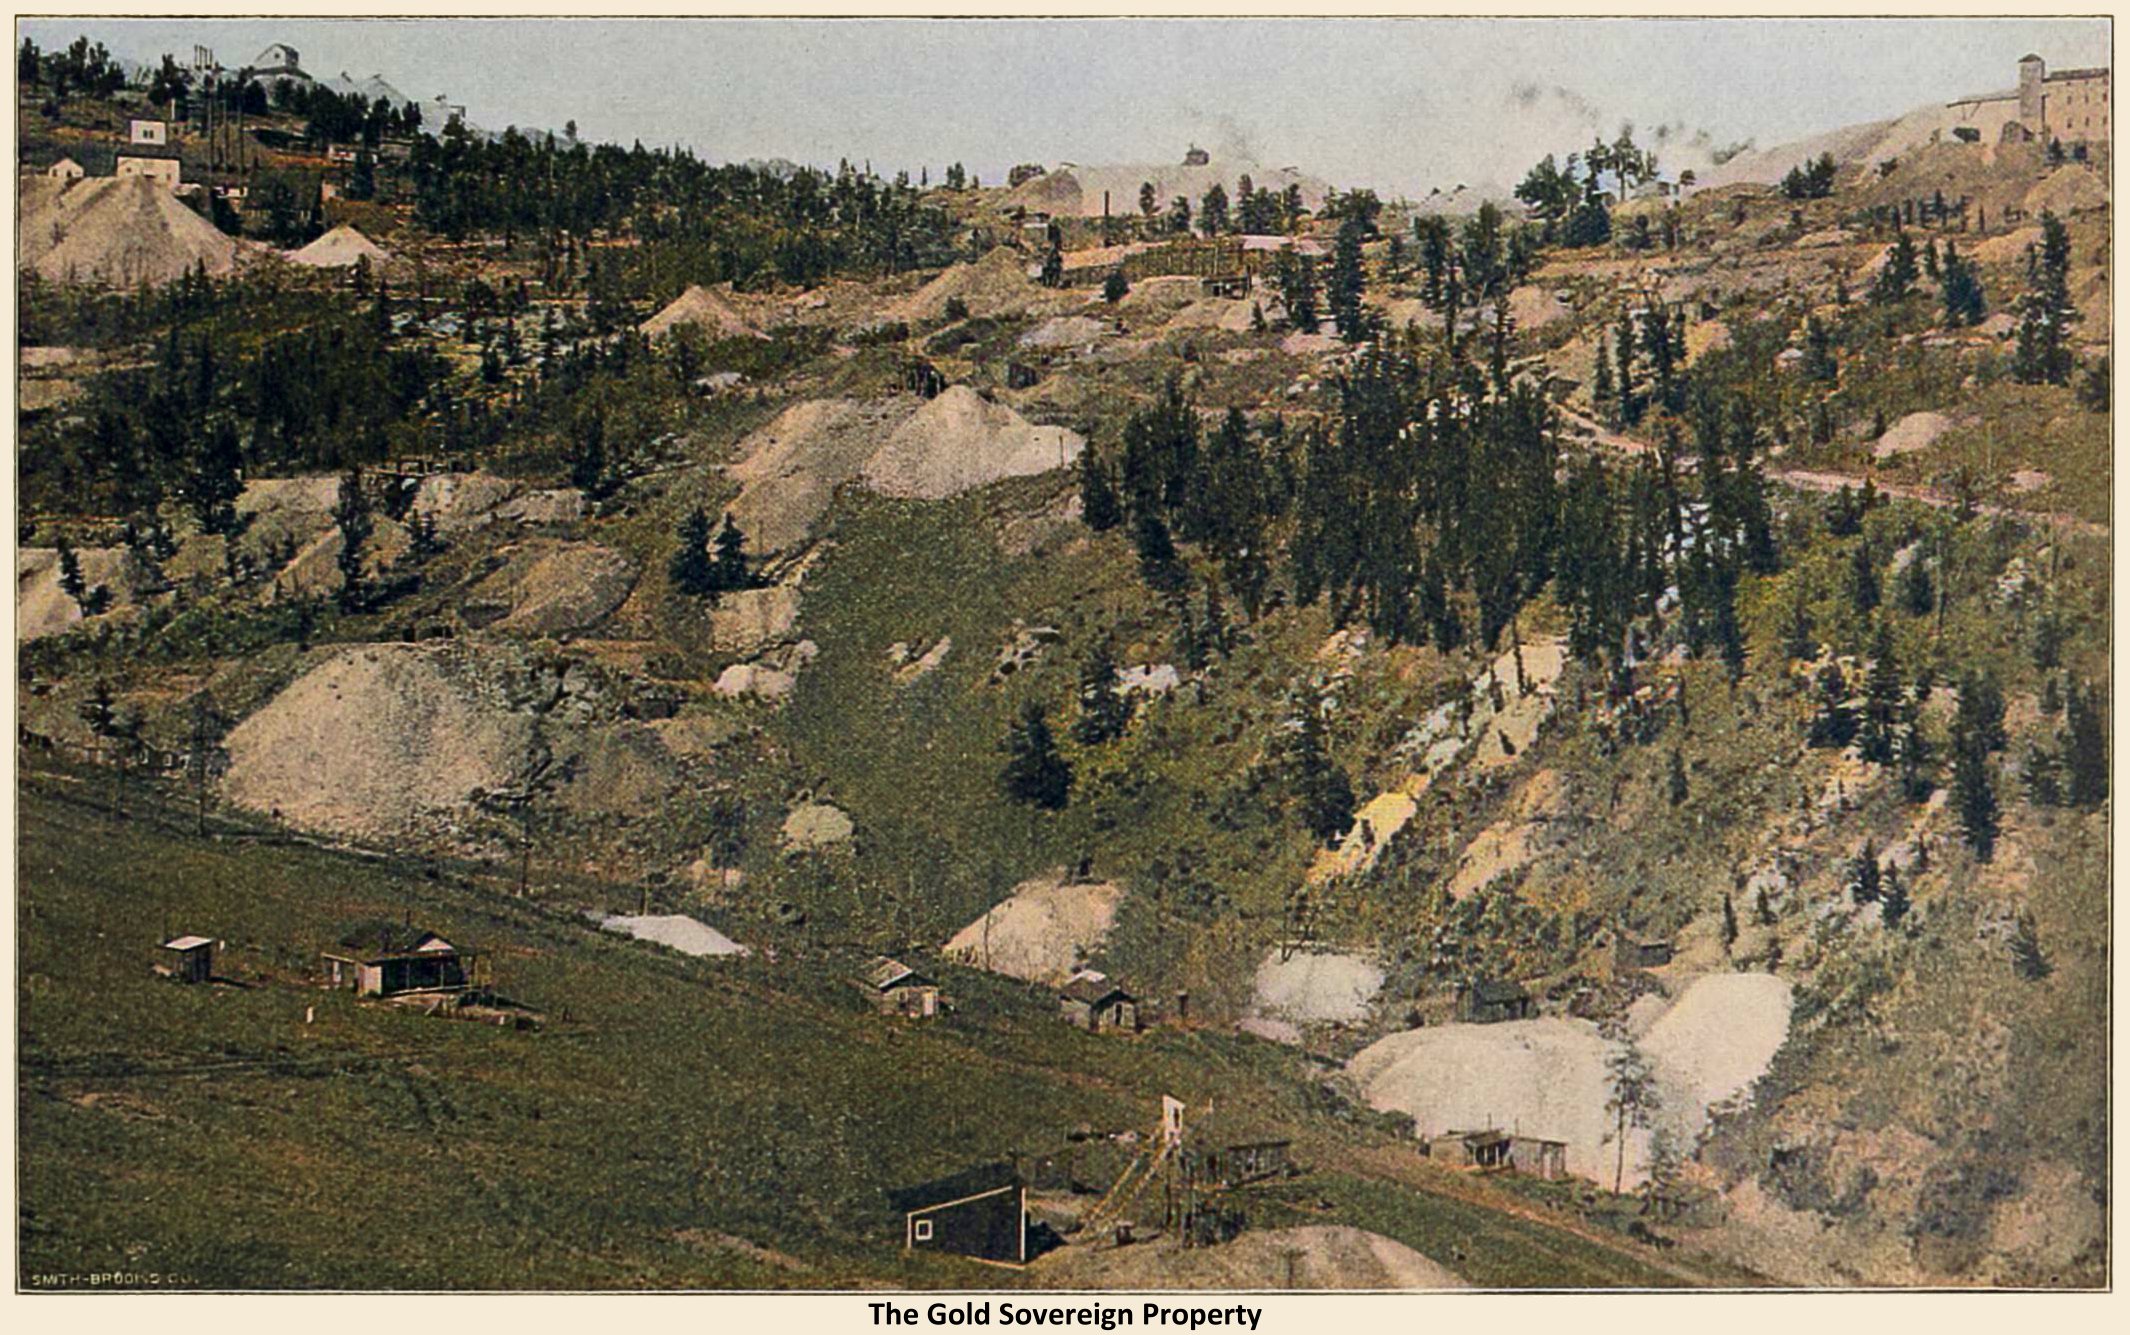 This is not the best quality image, but as I have not seen this view before I am happy to have what I have. View is at the south west slope of Bull Hill, taken from Raven Hill. It shows many mines and is an illustrative view at how mining looks as there are many small dumps, but also several large ones.
   * Up at upper left the American Eagle mine is seen against the sky, while the John A. Logan mine is just below a slightly bit to the left, with a huge dump in-front of it.
   * In upper right corner is the Blue Bird mine, also with a huge dump.
   * In foreground bottom, about center, I think the Mary L. mine operation is seen.
   * Across the gulch, large dump almost at bottom I think the Ben Harrison tunnel operation is seen.
   * The Dante mine is about center near top, seen as huge crib-walls, with the dumps of the Orpha May mine seen against the sky above.
   * The Gold Sovereign is some of the dumps at the left side, spread up the hill.
   I did procure the colored version of the image, source was gray-toned, or in common speech black & white. Used an online service and tweaked and worked with image to get what looks best to my eyes, including straightening and cropping this view.